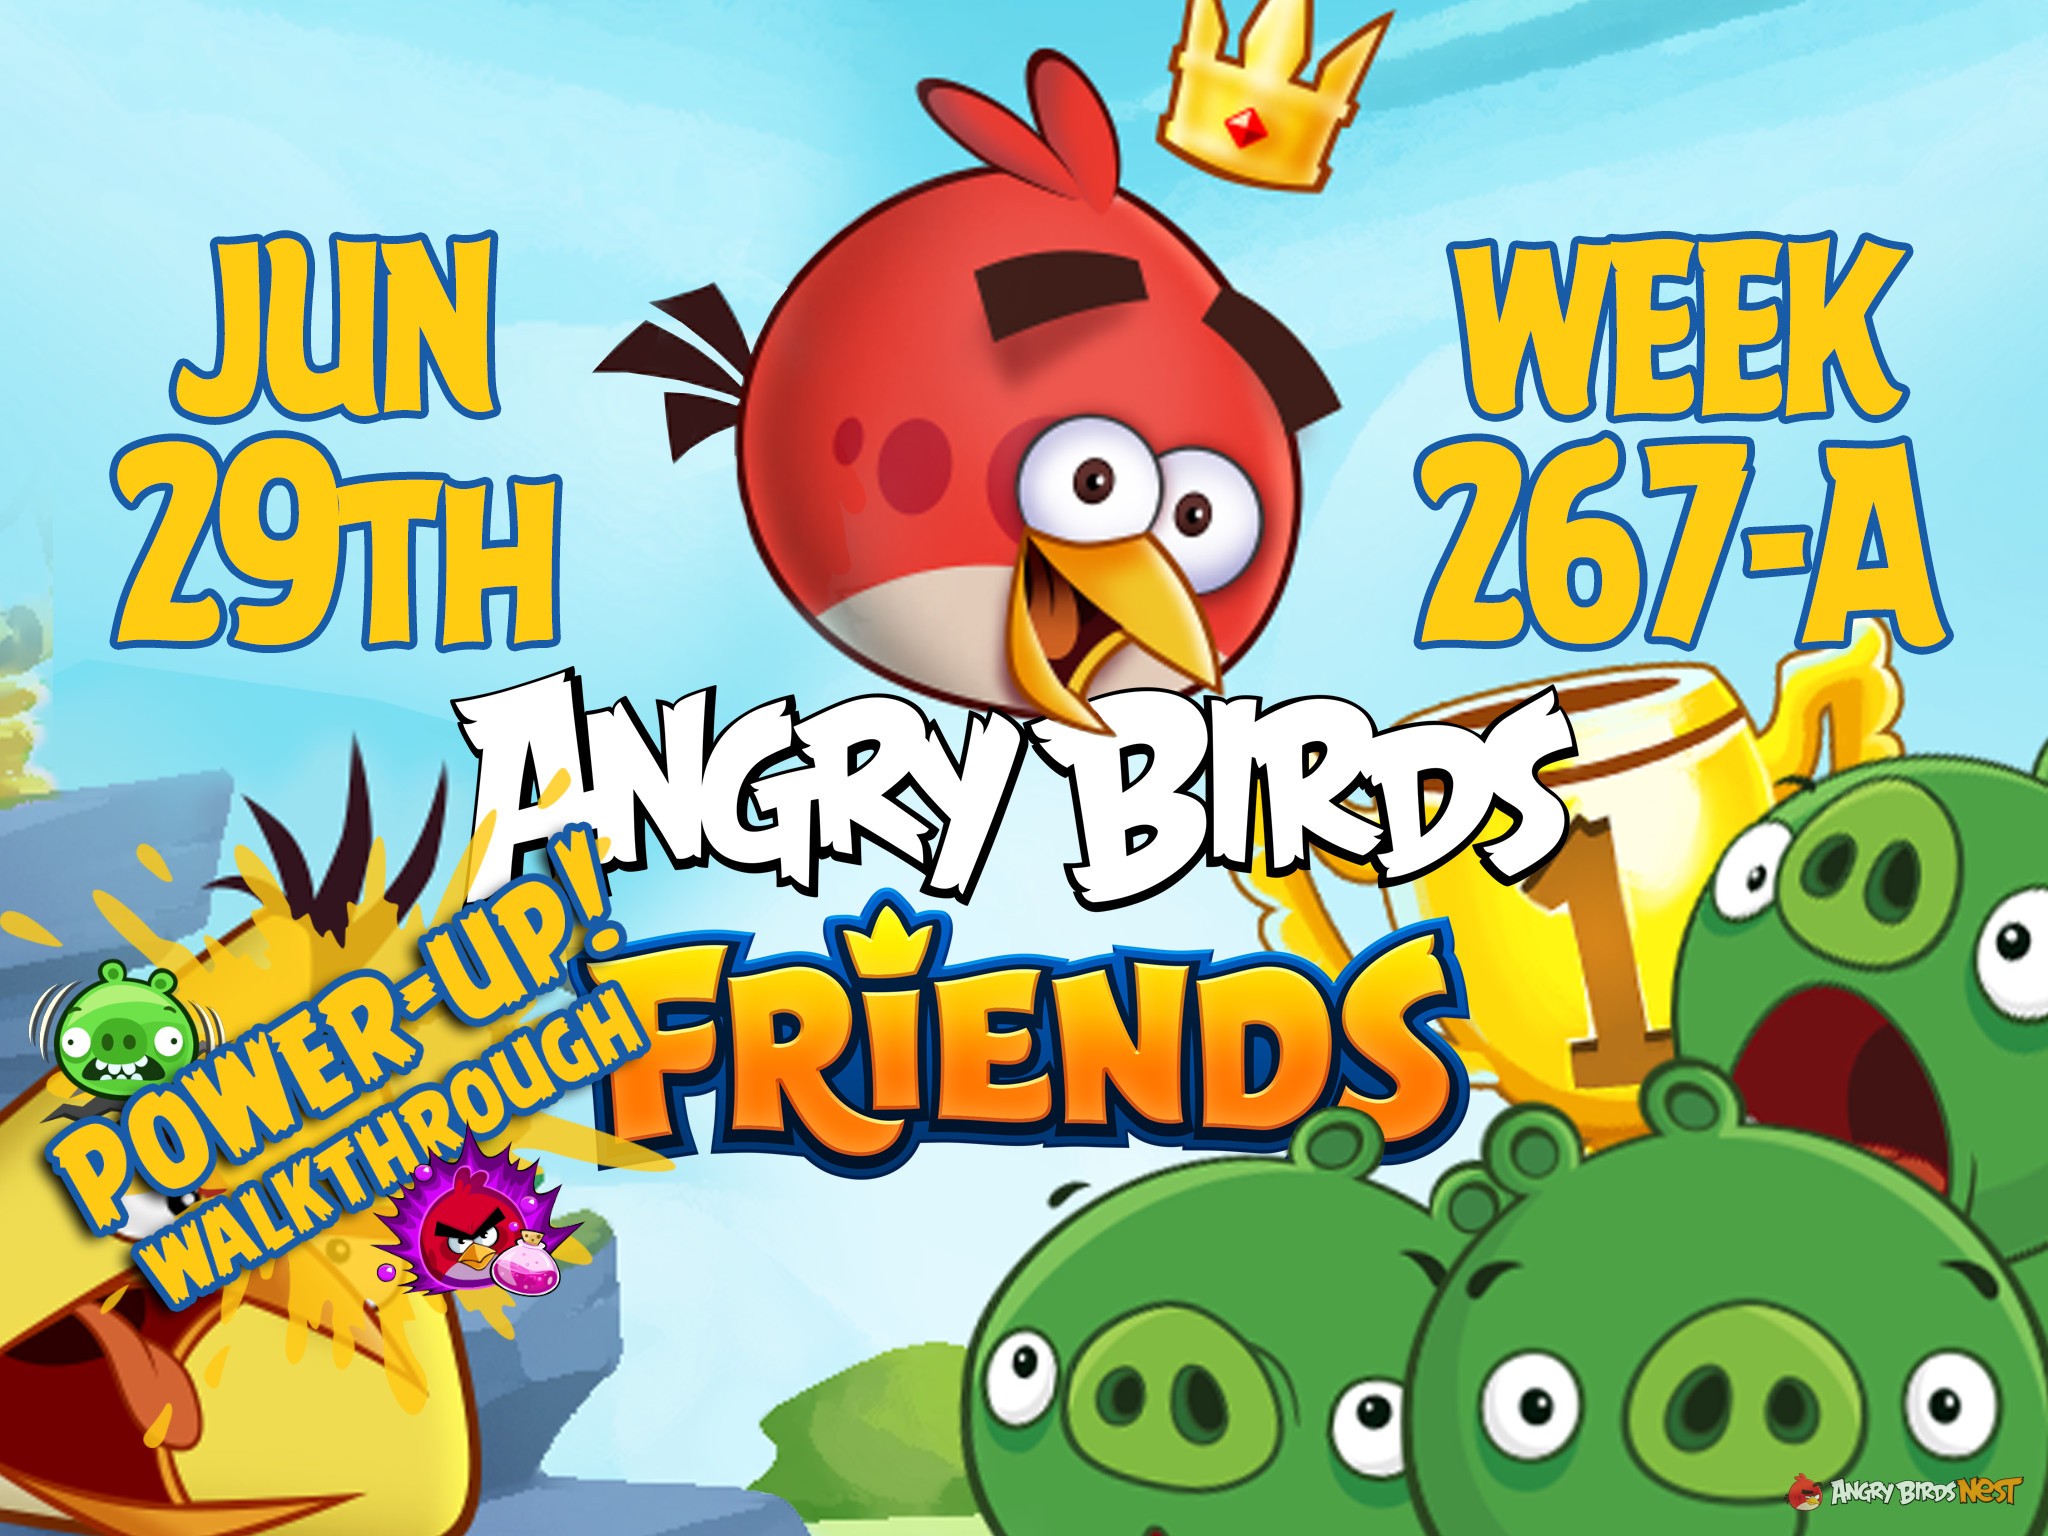 Angry Birds Friends Tournament Week 267-A Feature Image PU